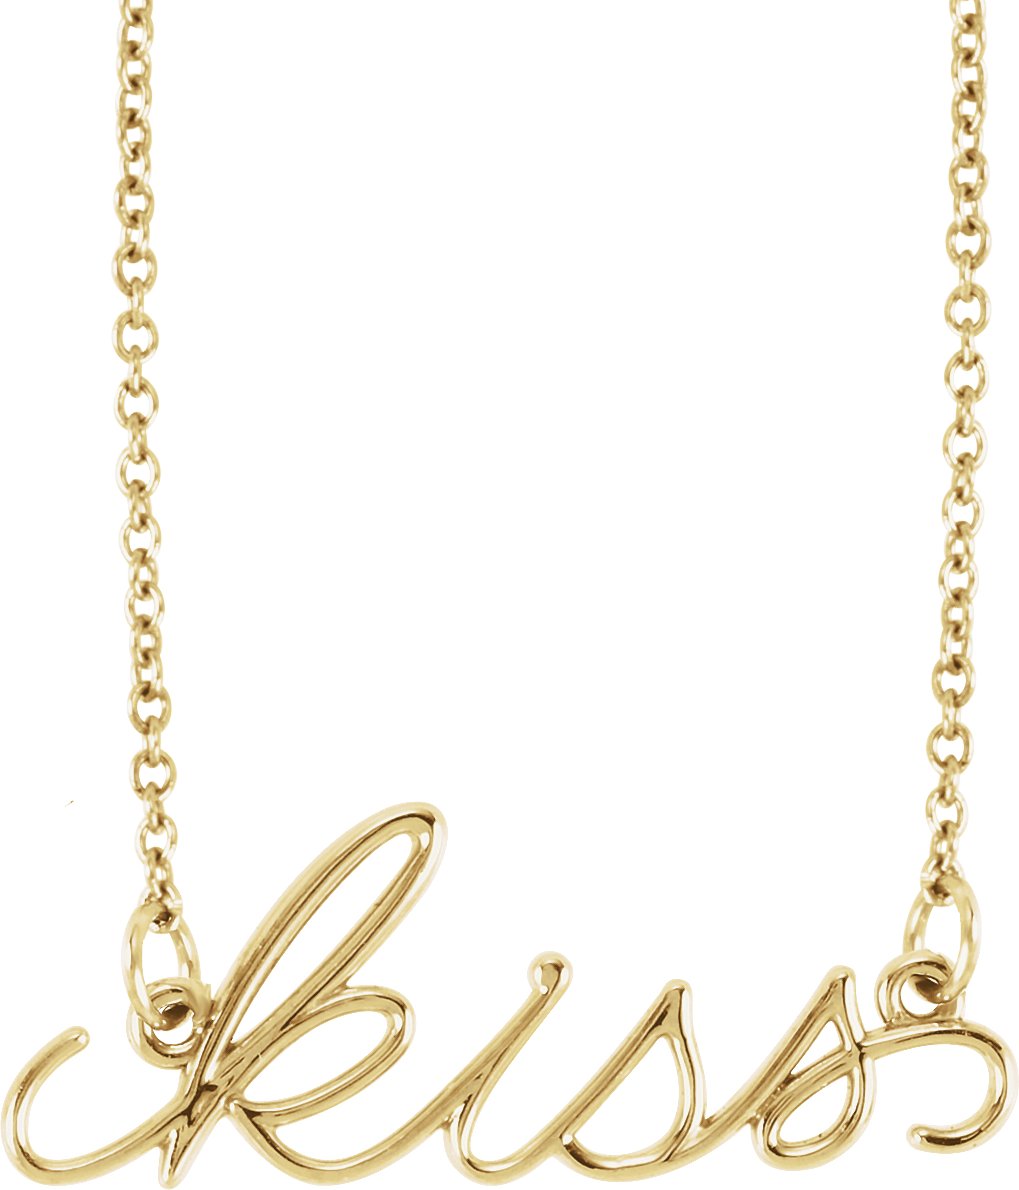 14K Yellow "Kiss" 16.5" Necklace